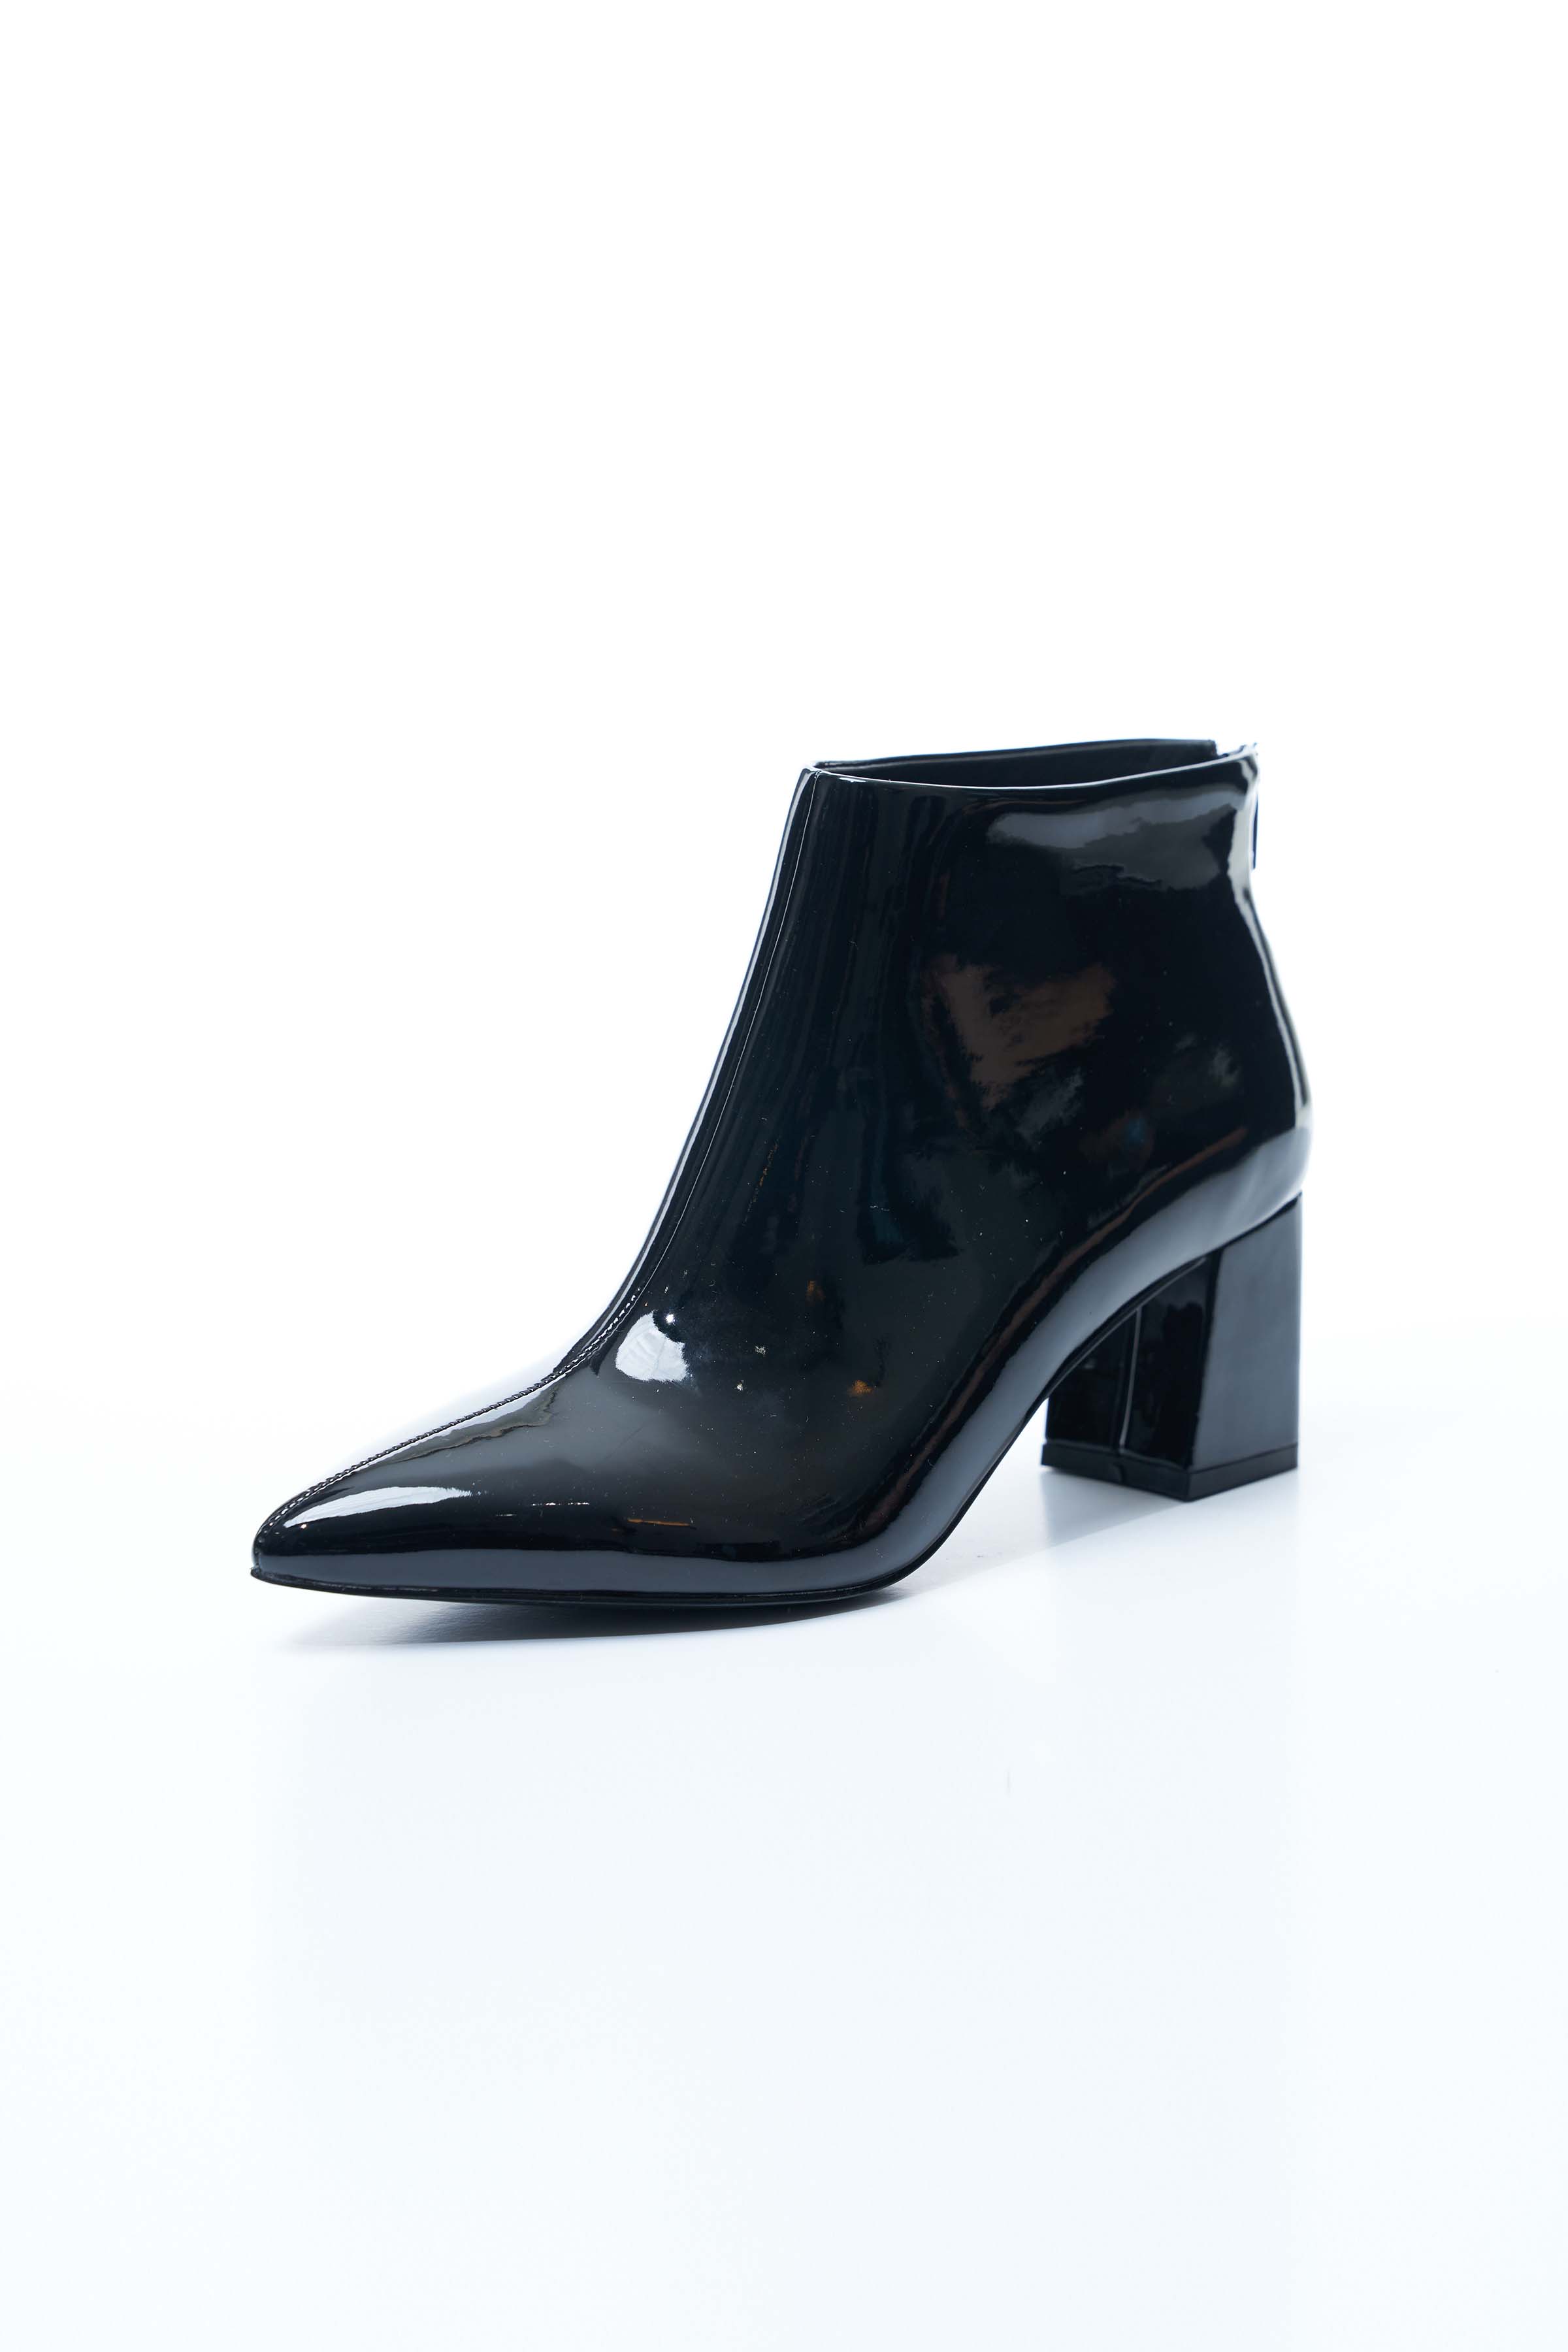 LAURA Black Patent Leather - VHNY 